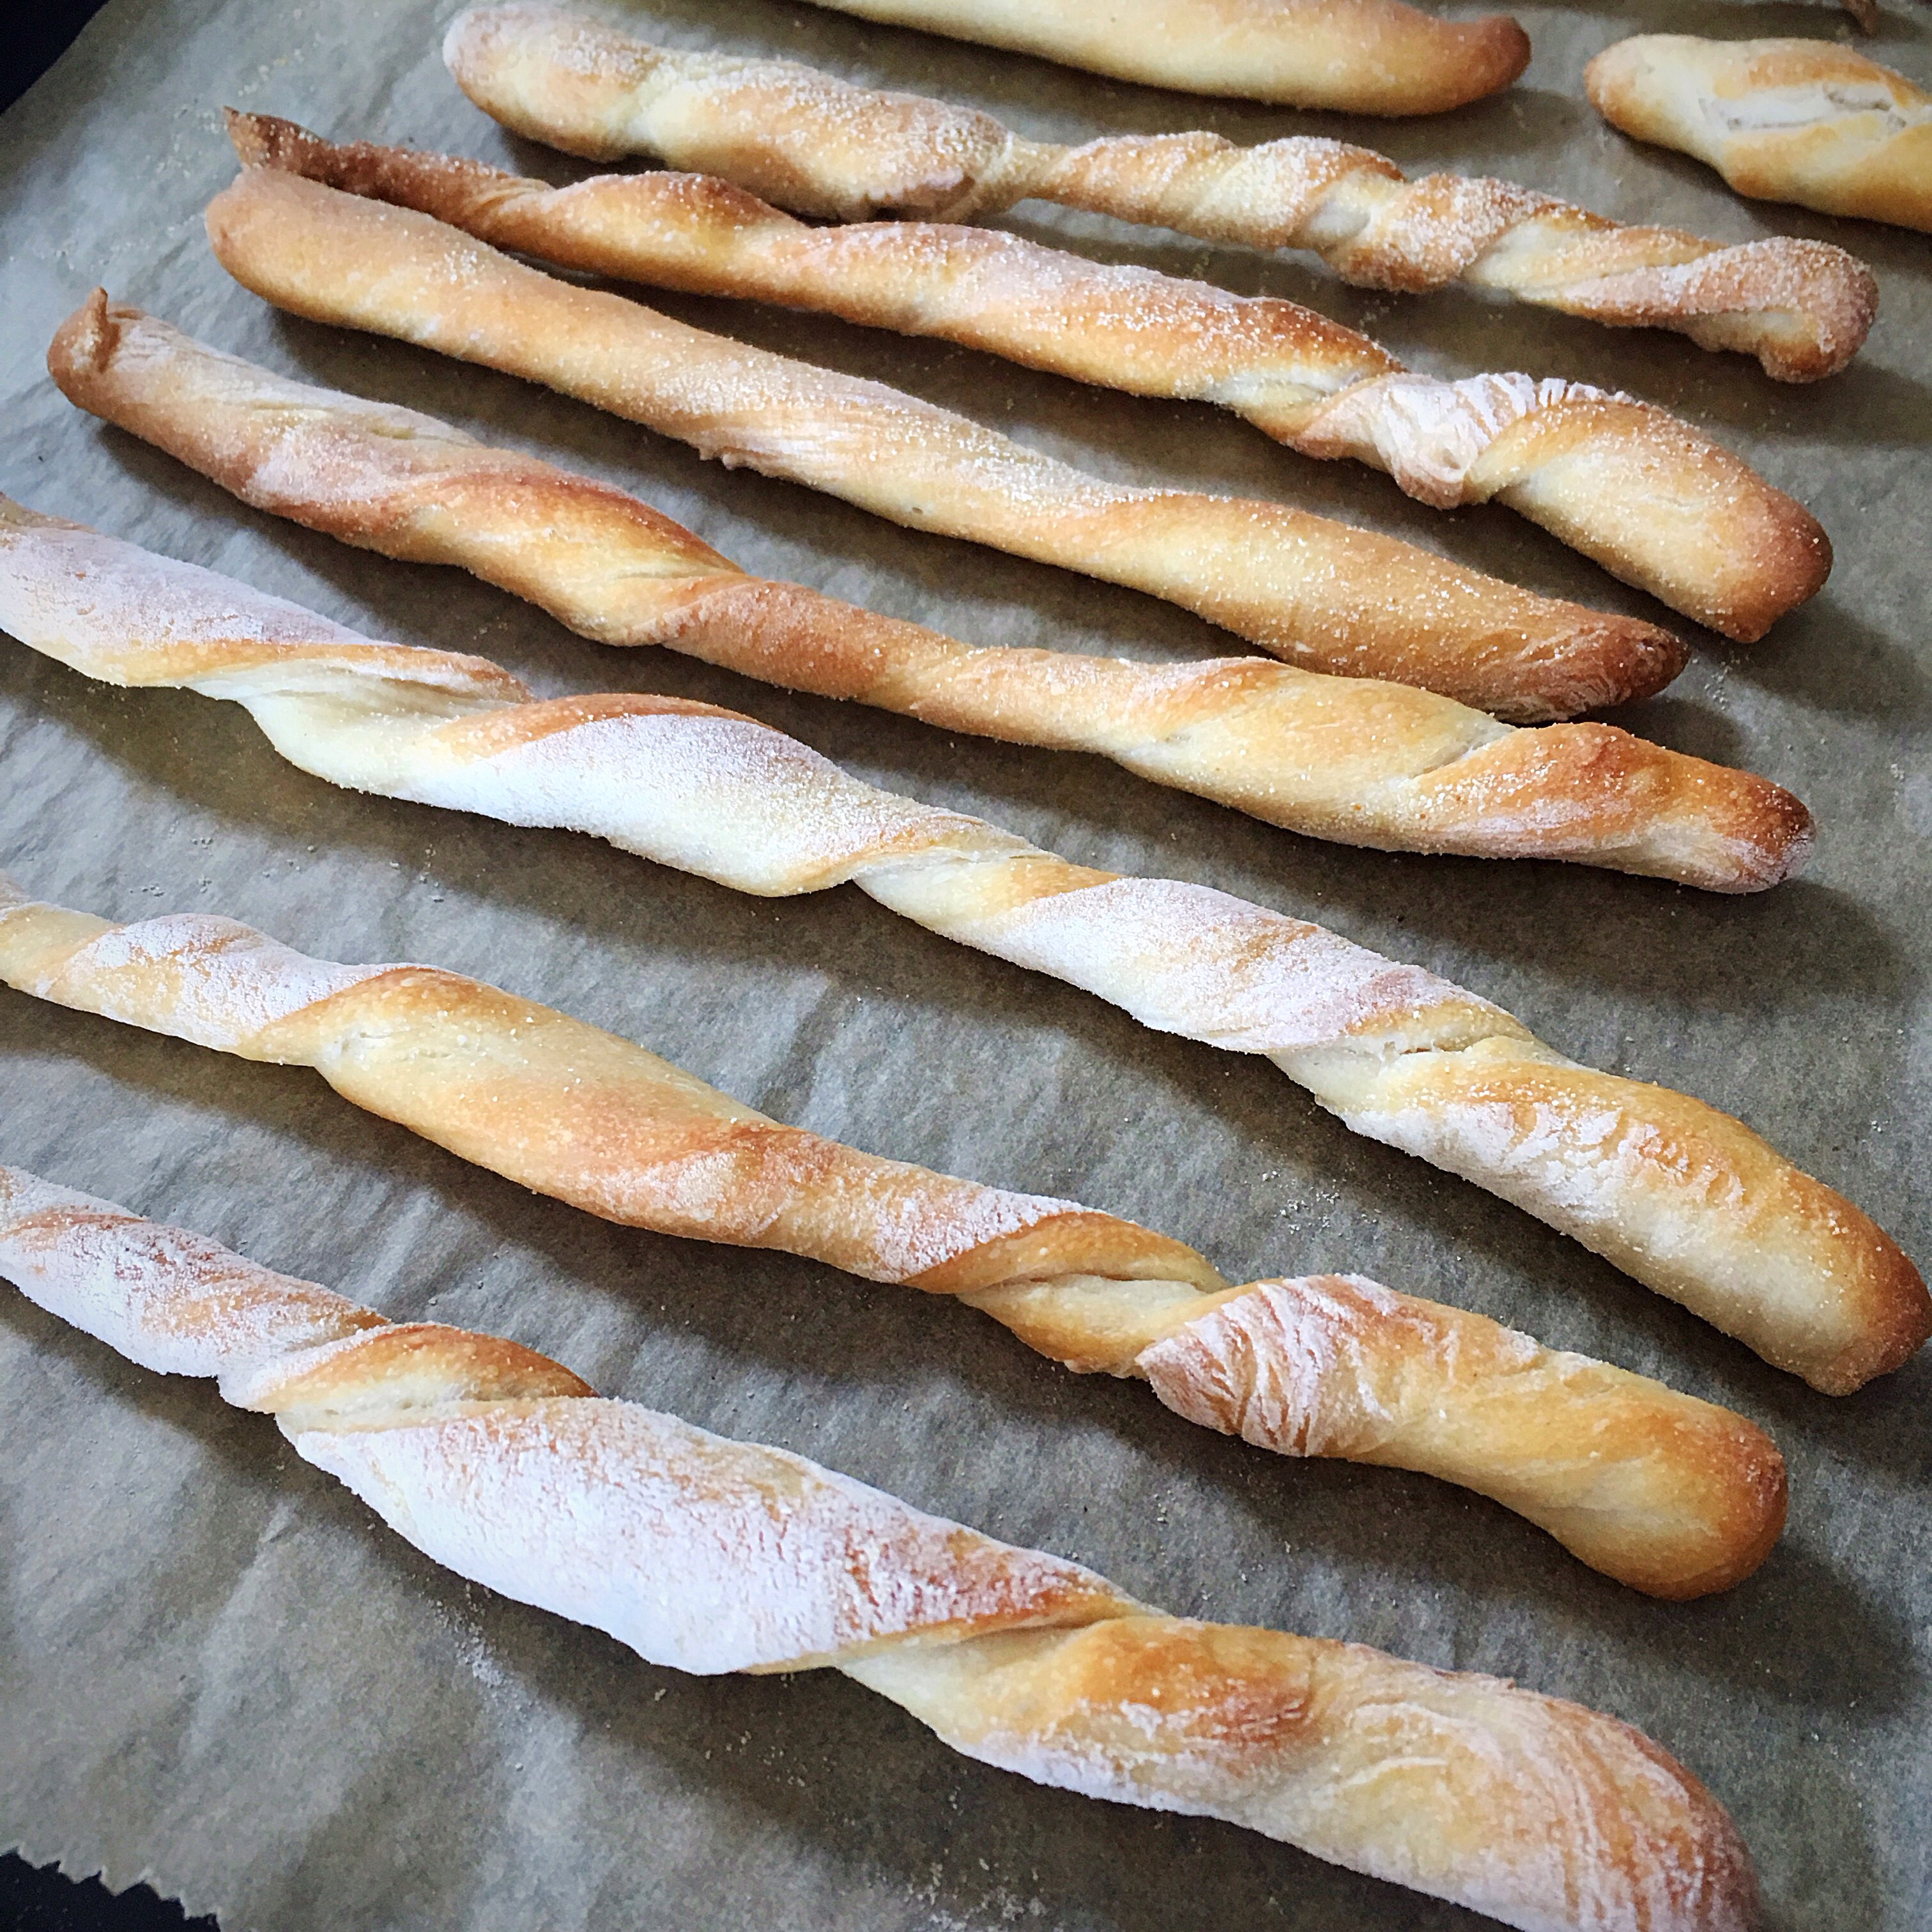 A bunch of bread sticks sitting on top of a sheet.